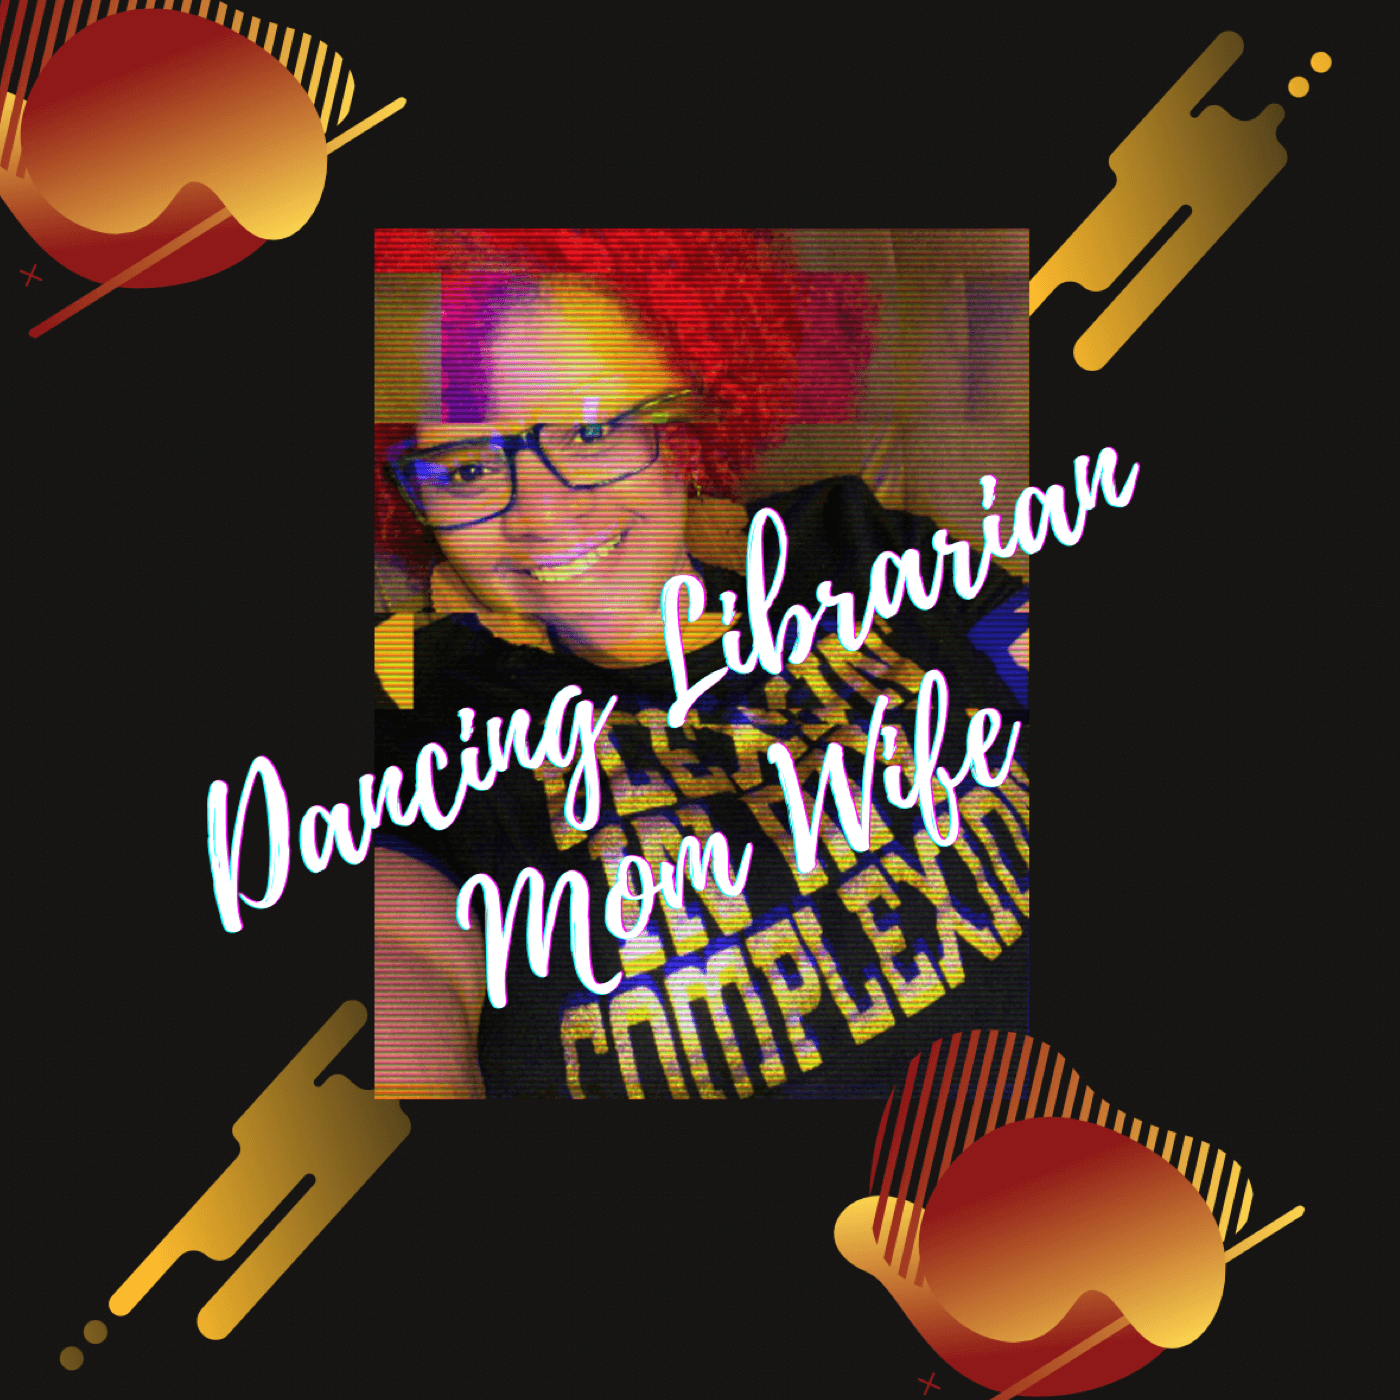 The DancingLibrarianMomWife's Podcast